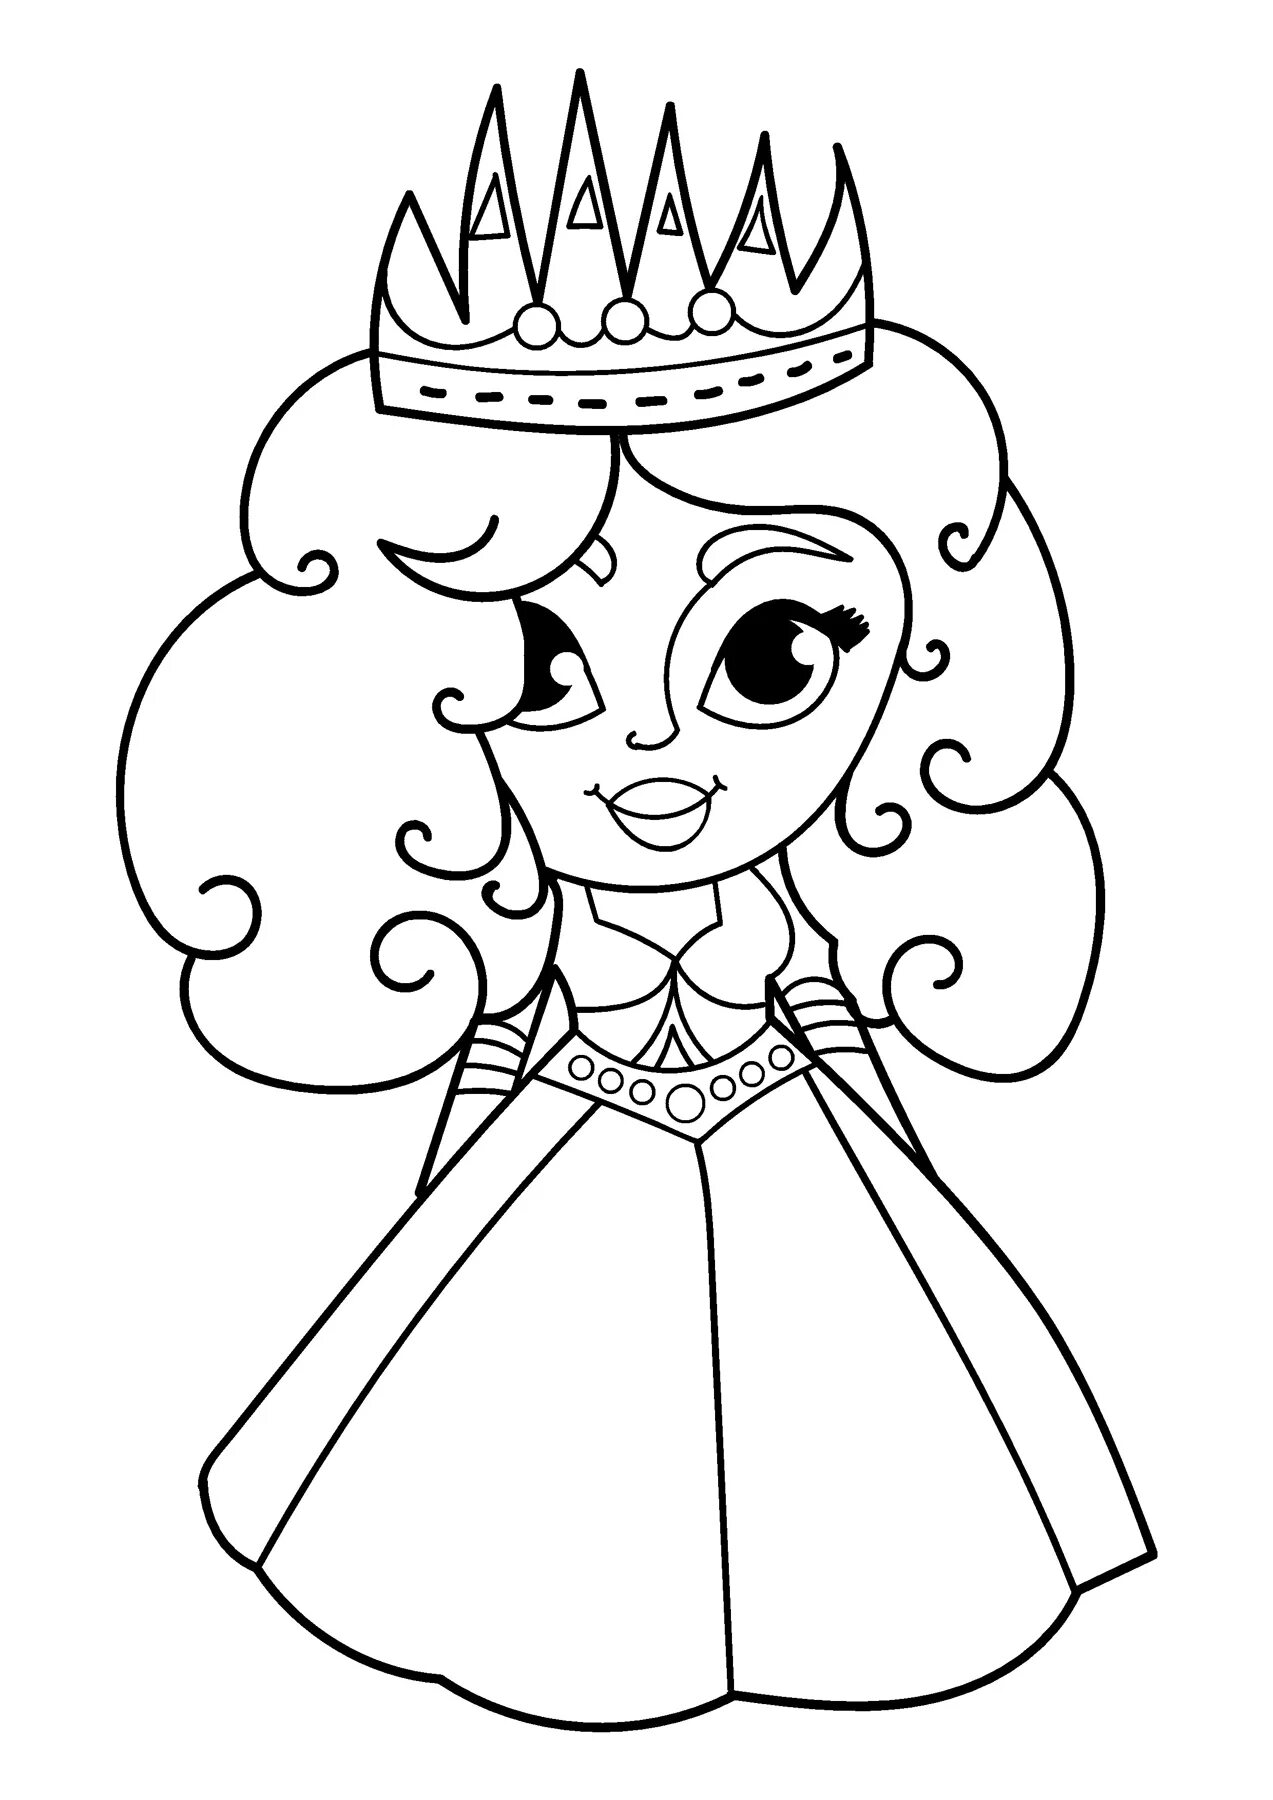 Luminous princess coloring pages 4-5 years old